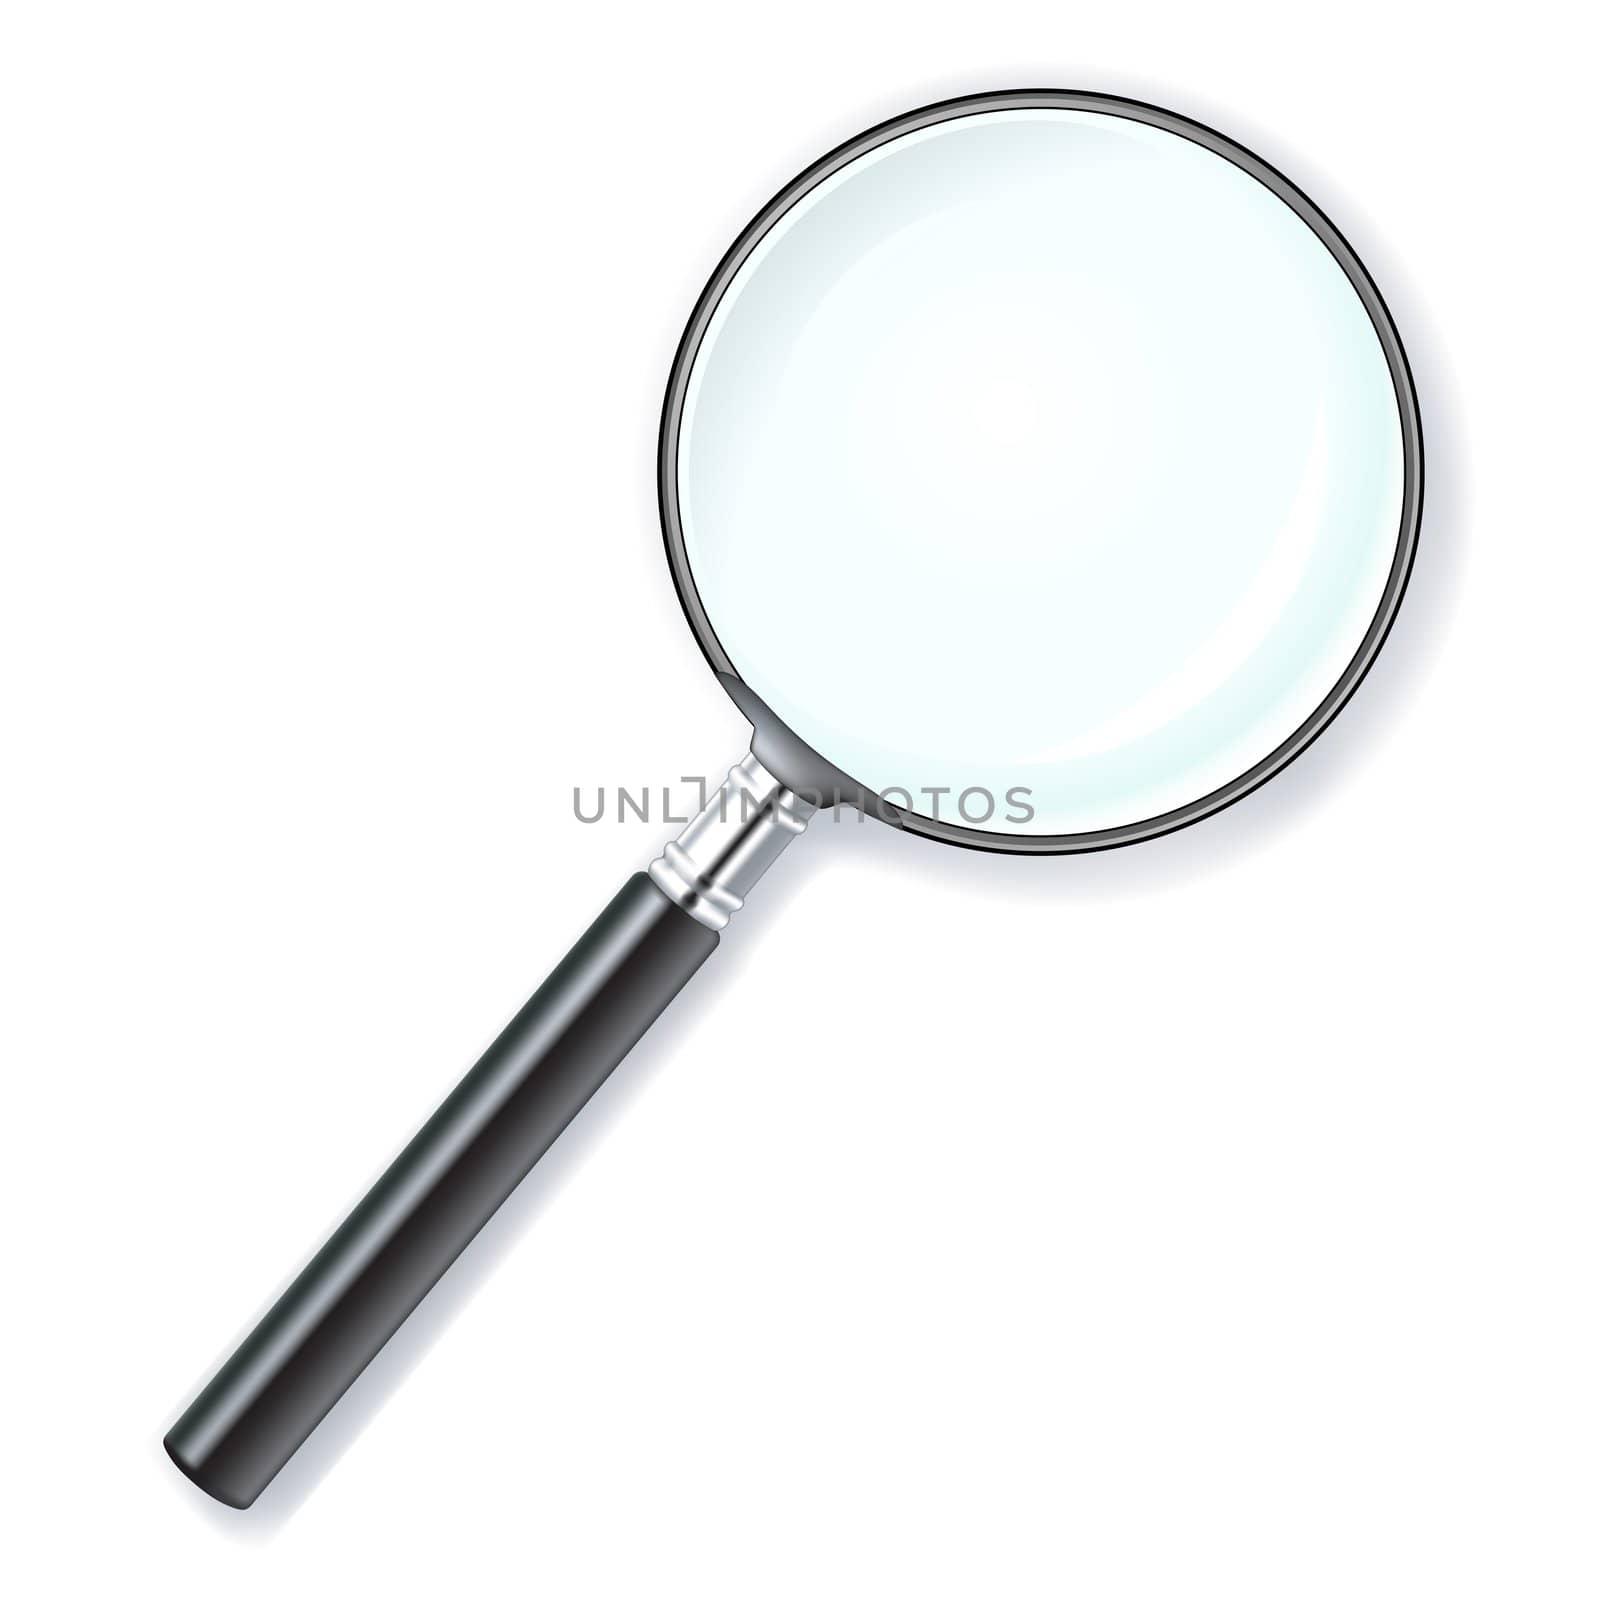 illustration of a magnifying lens over white background